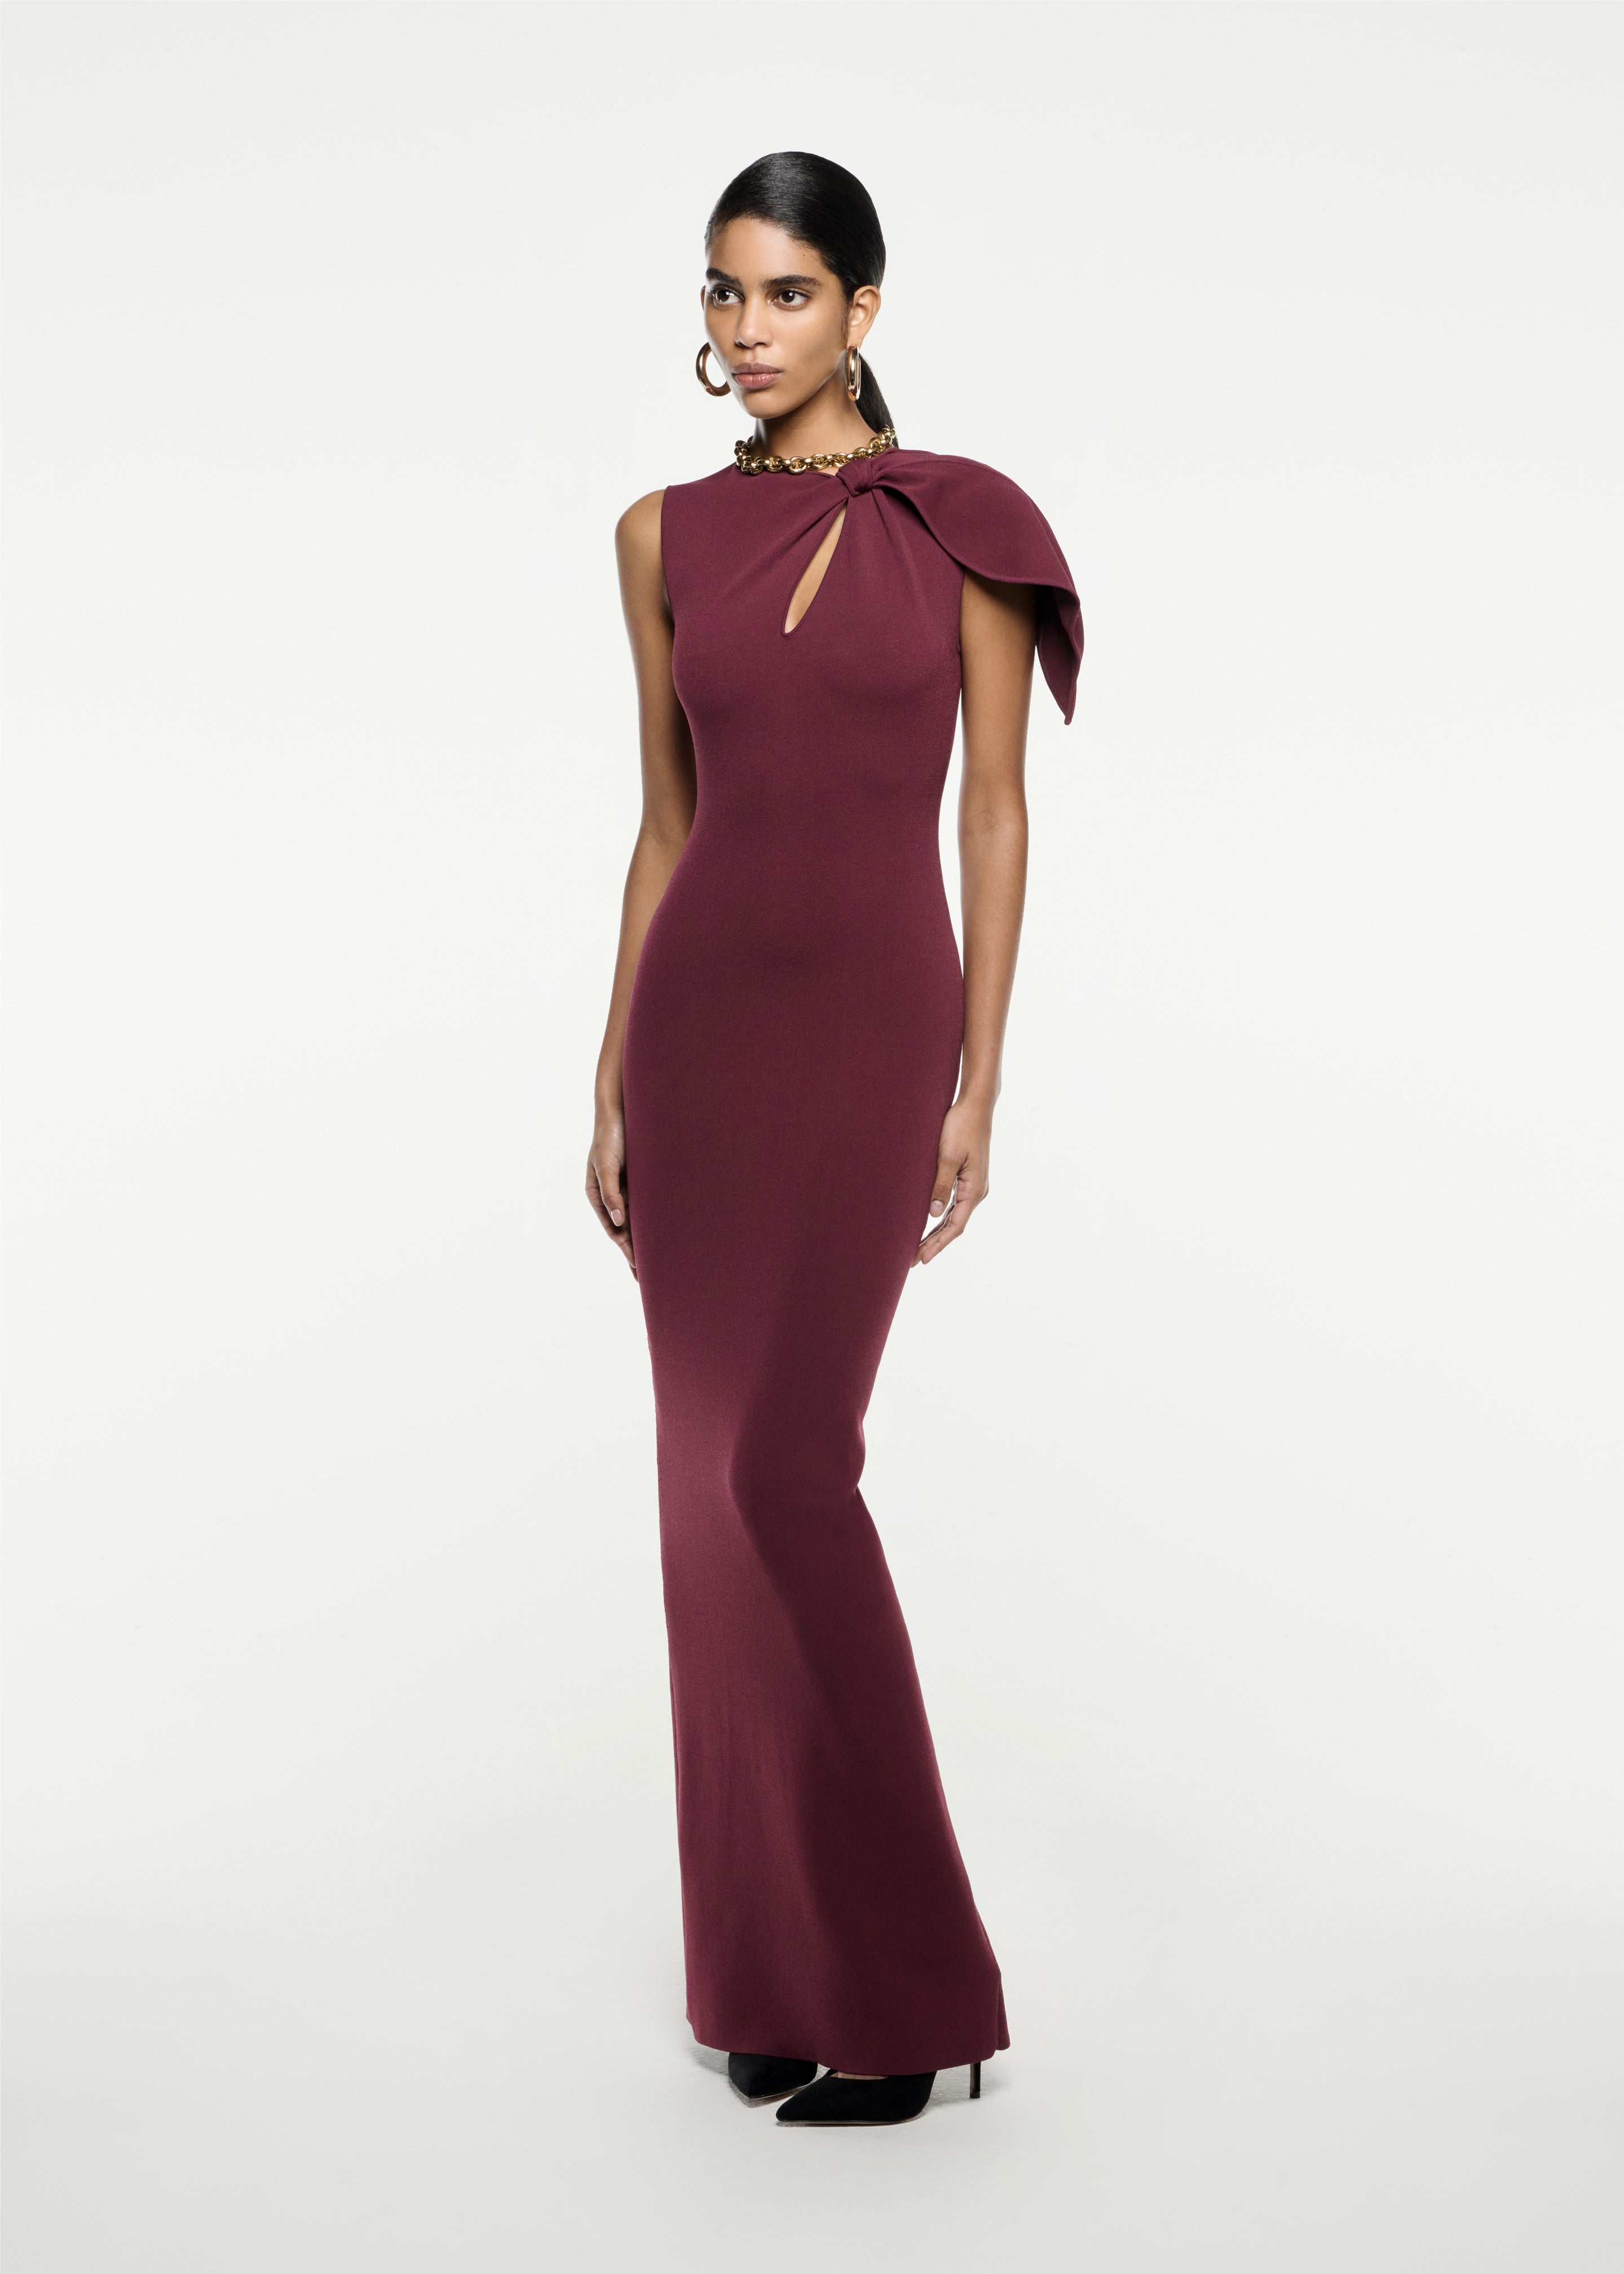 ROLAND MOURET - Pleated Jersey Maxi Dress